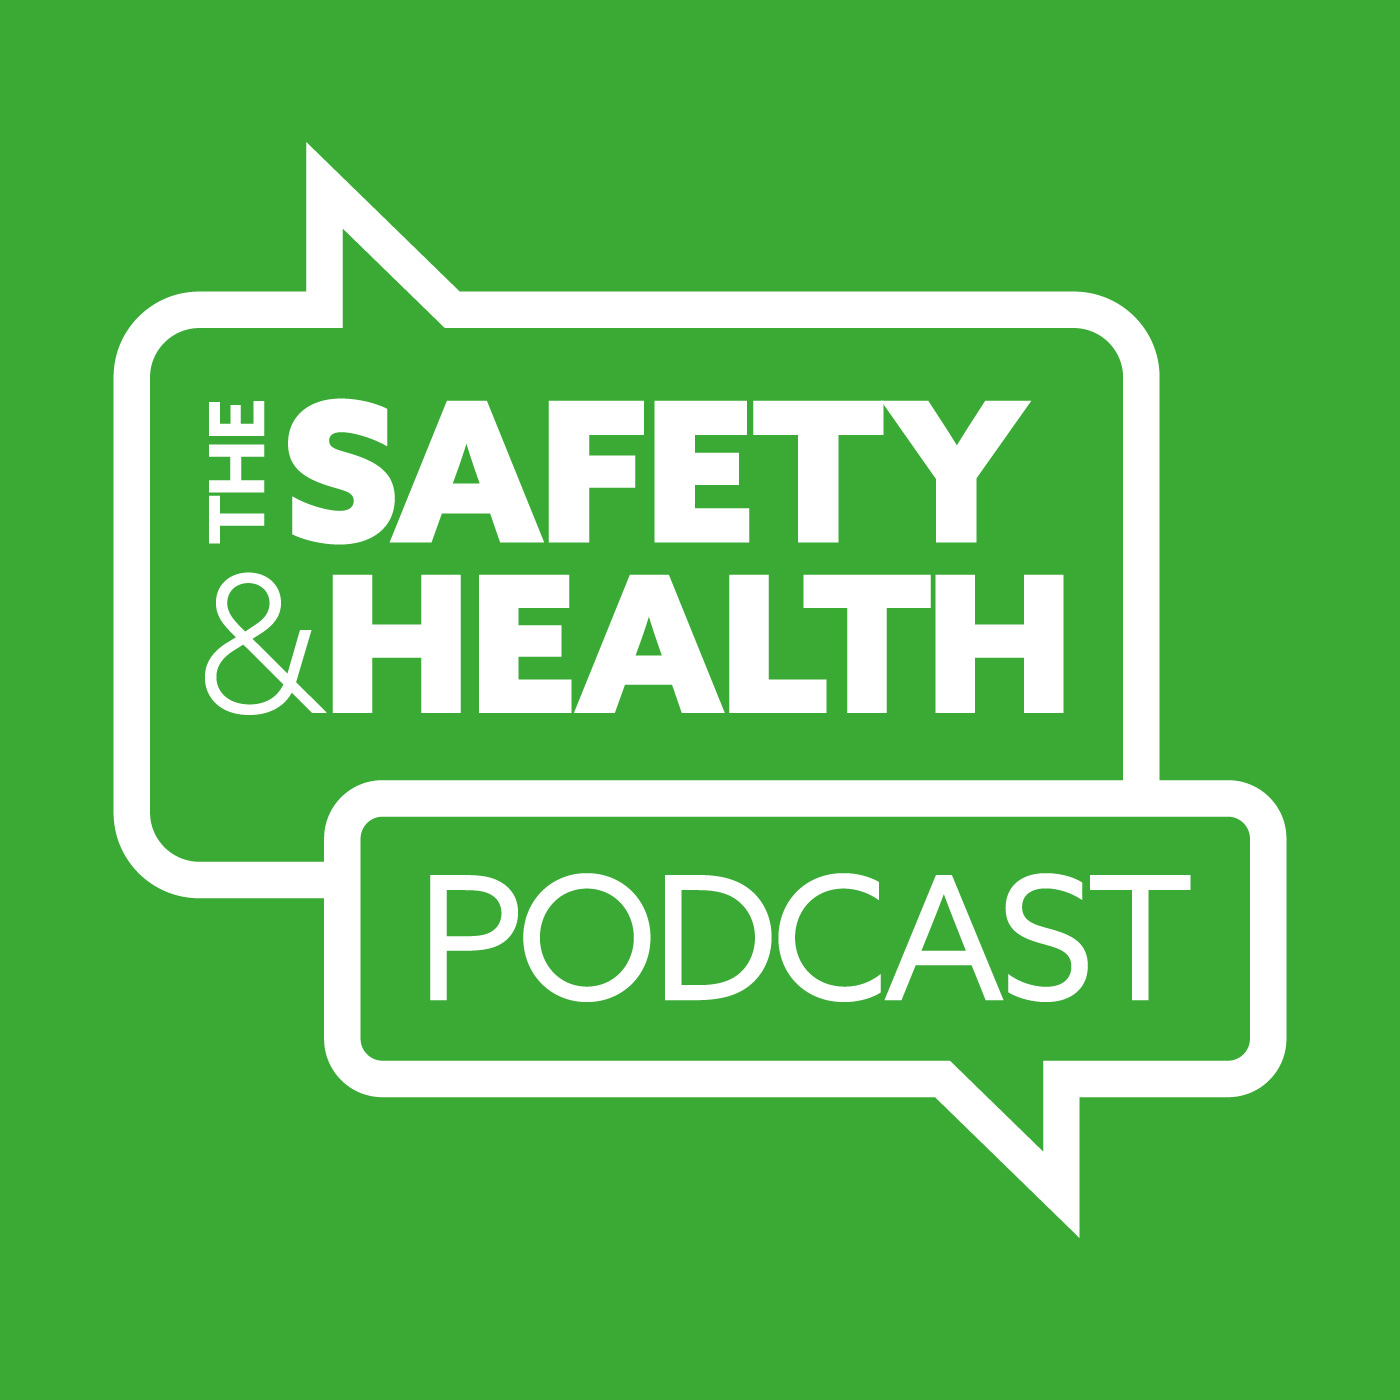 Artwork for podcast The Safety & Health Podcast